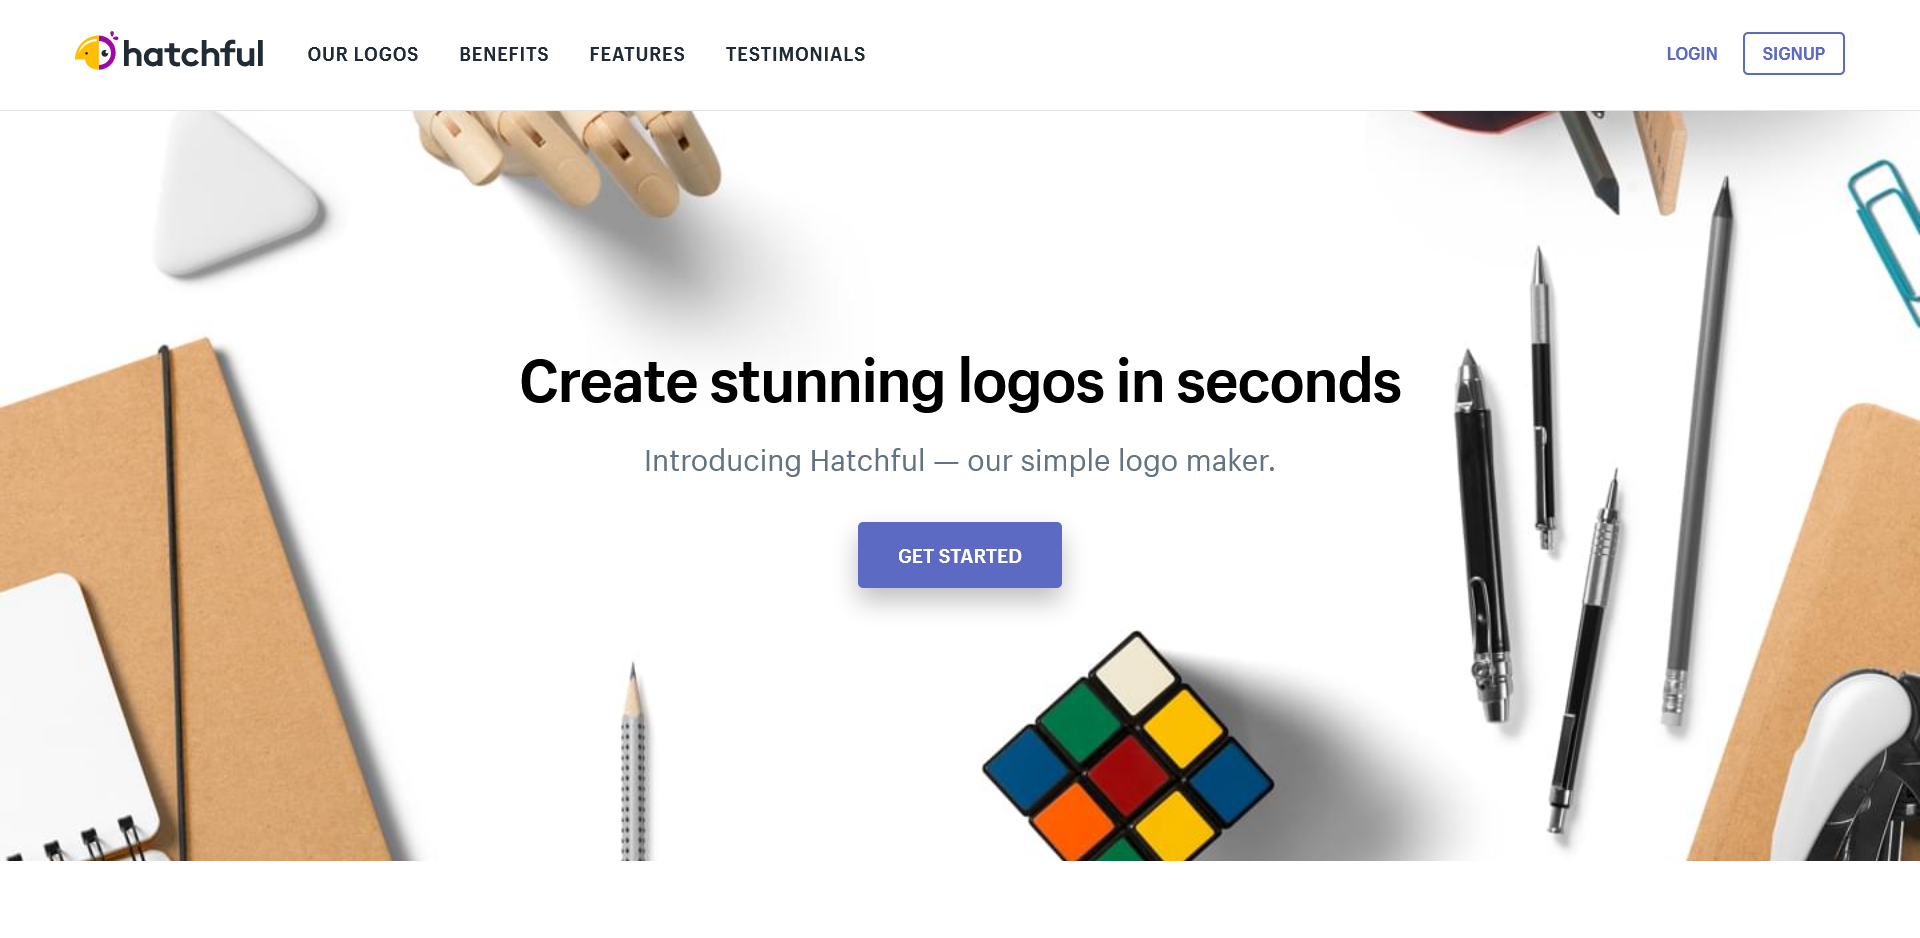 Top 5 Free Logo Maker on Internet You should use., Connect in Cloud Ltd